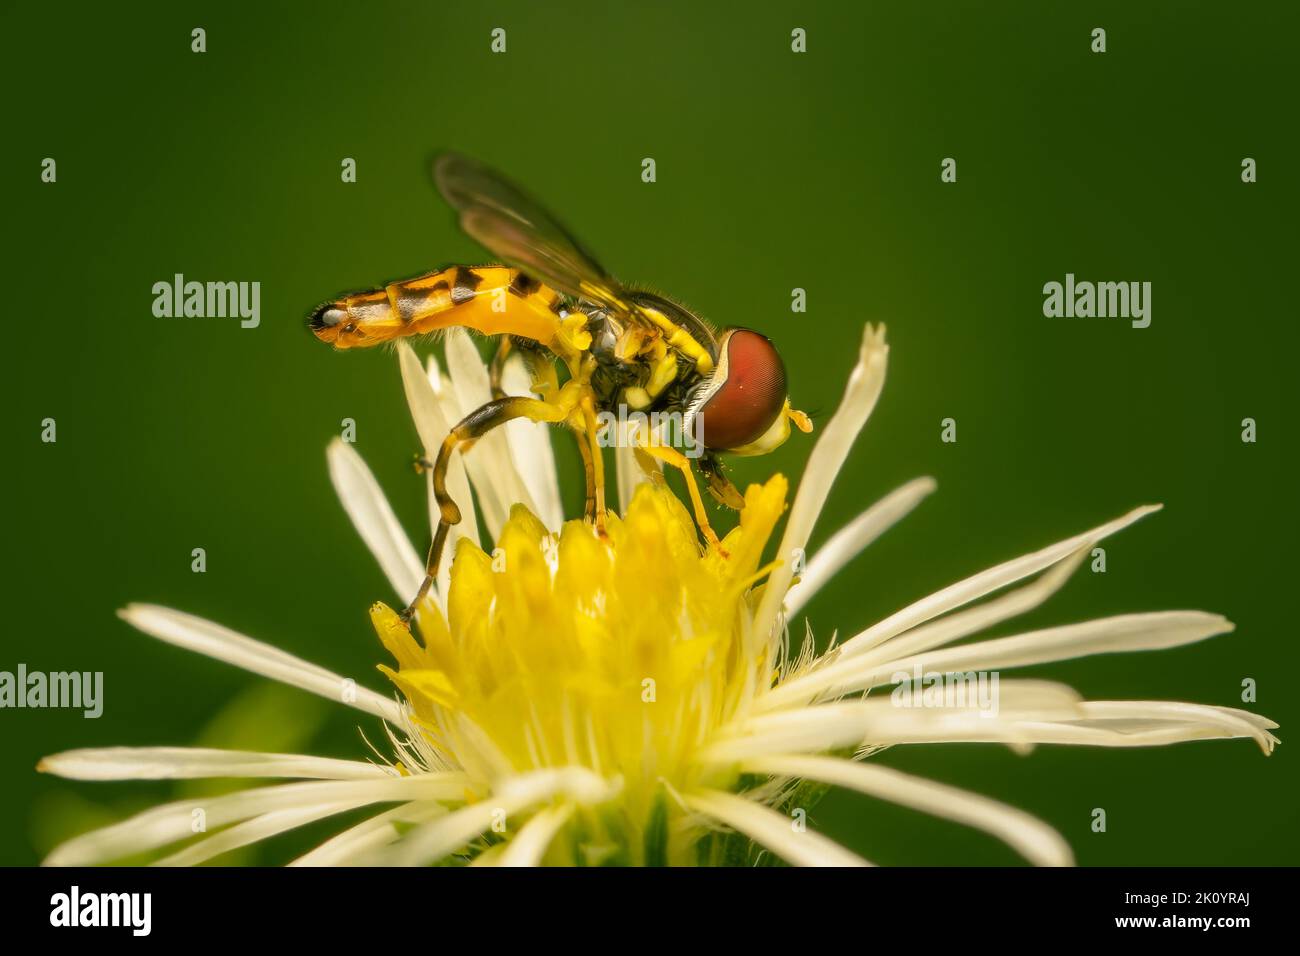 Small hover fly gathering pollen on a symphyotricum flower on blurred green background Stock Photo